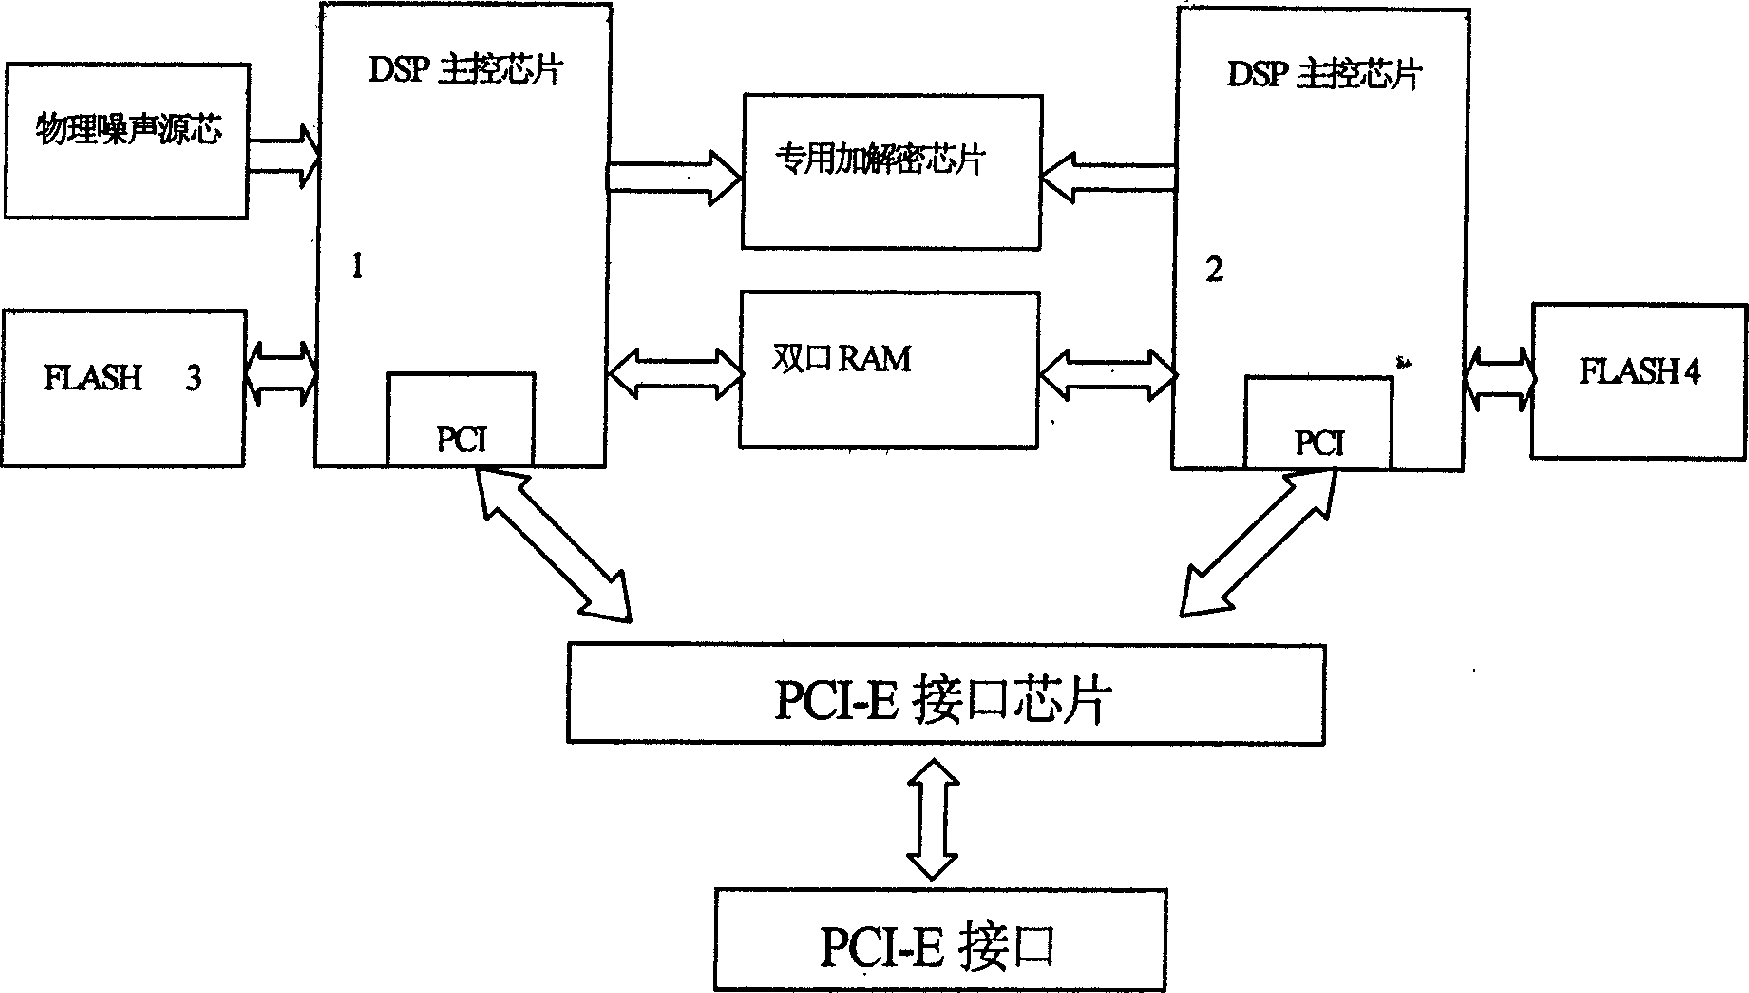 Encryption card based on PCI Express bus technology